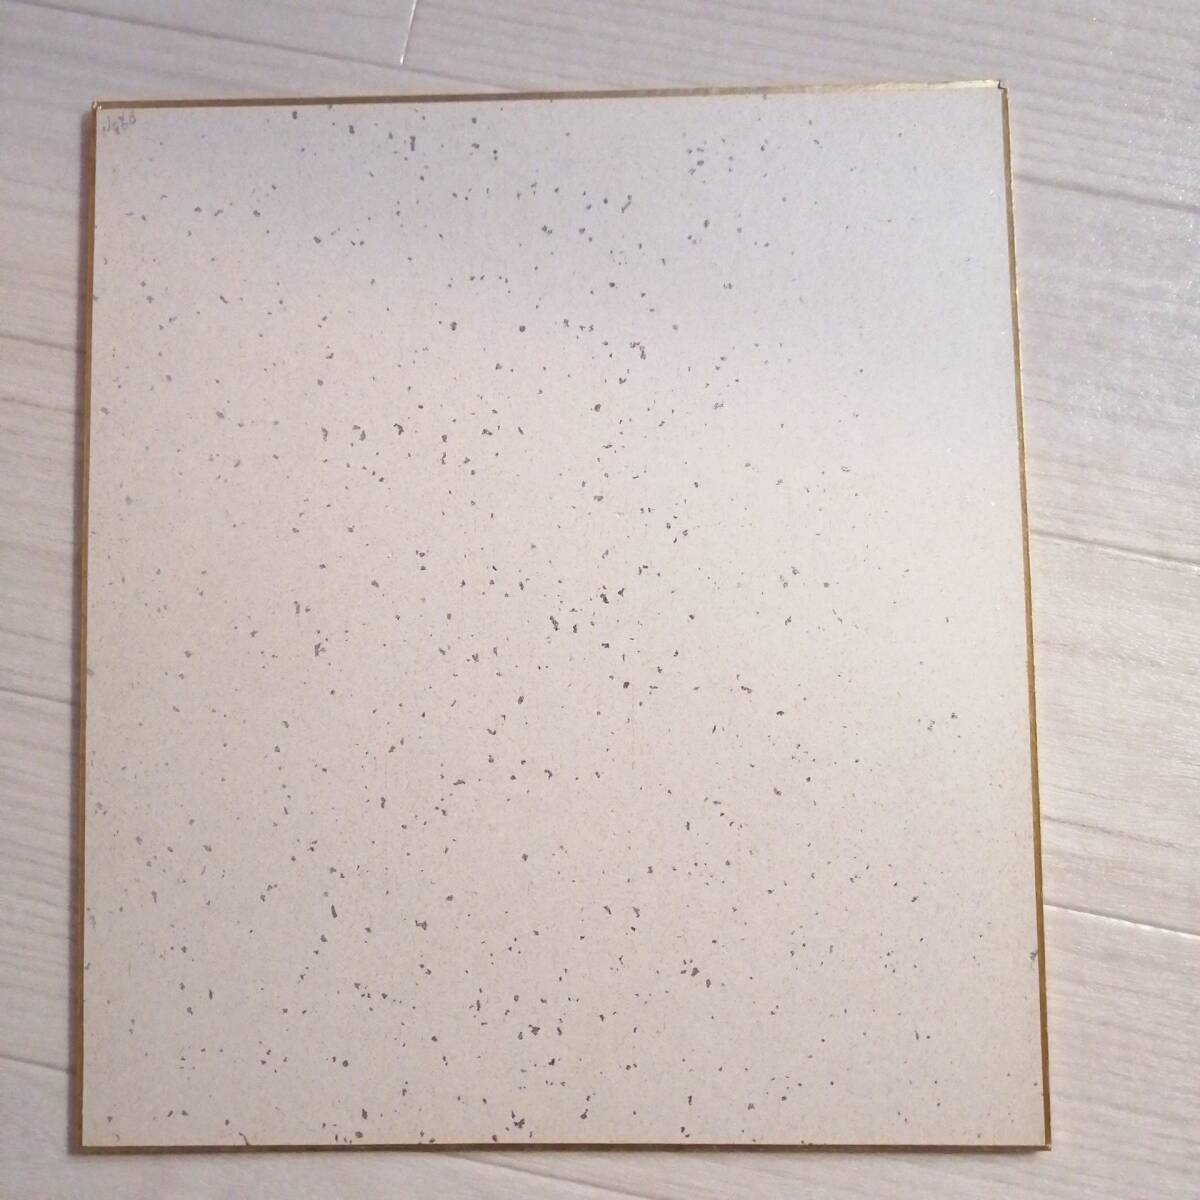  Sada Masashi with autograph square fancy cardboard S.53.9.22 date entering goods 